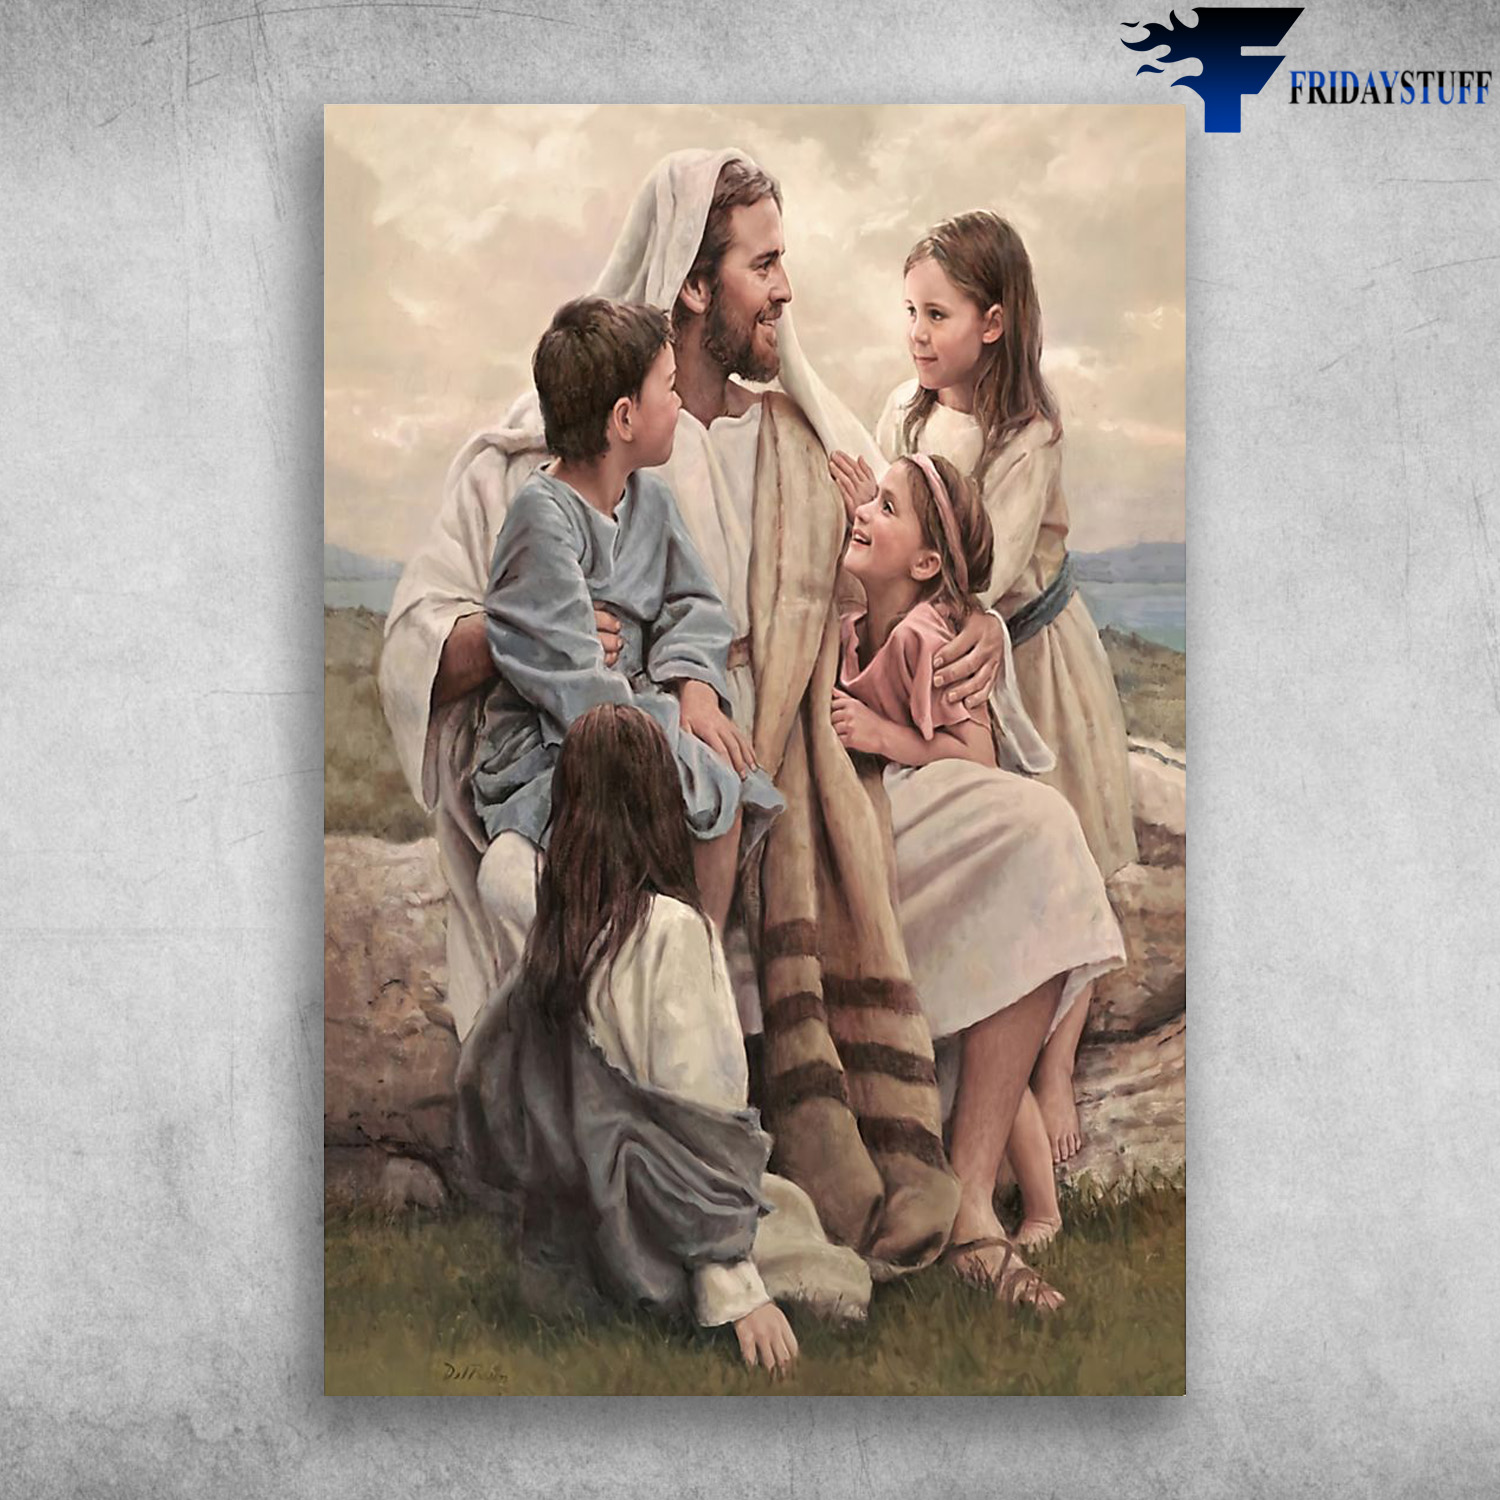 Jesus Christ Is God - But Jesus called the children to him and said, Let the little children come to me, and do not hinder them, for the kingdom of God belongs to such as these, God And The Children